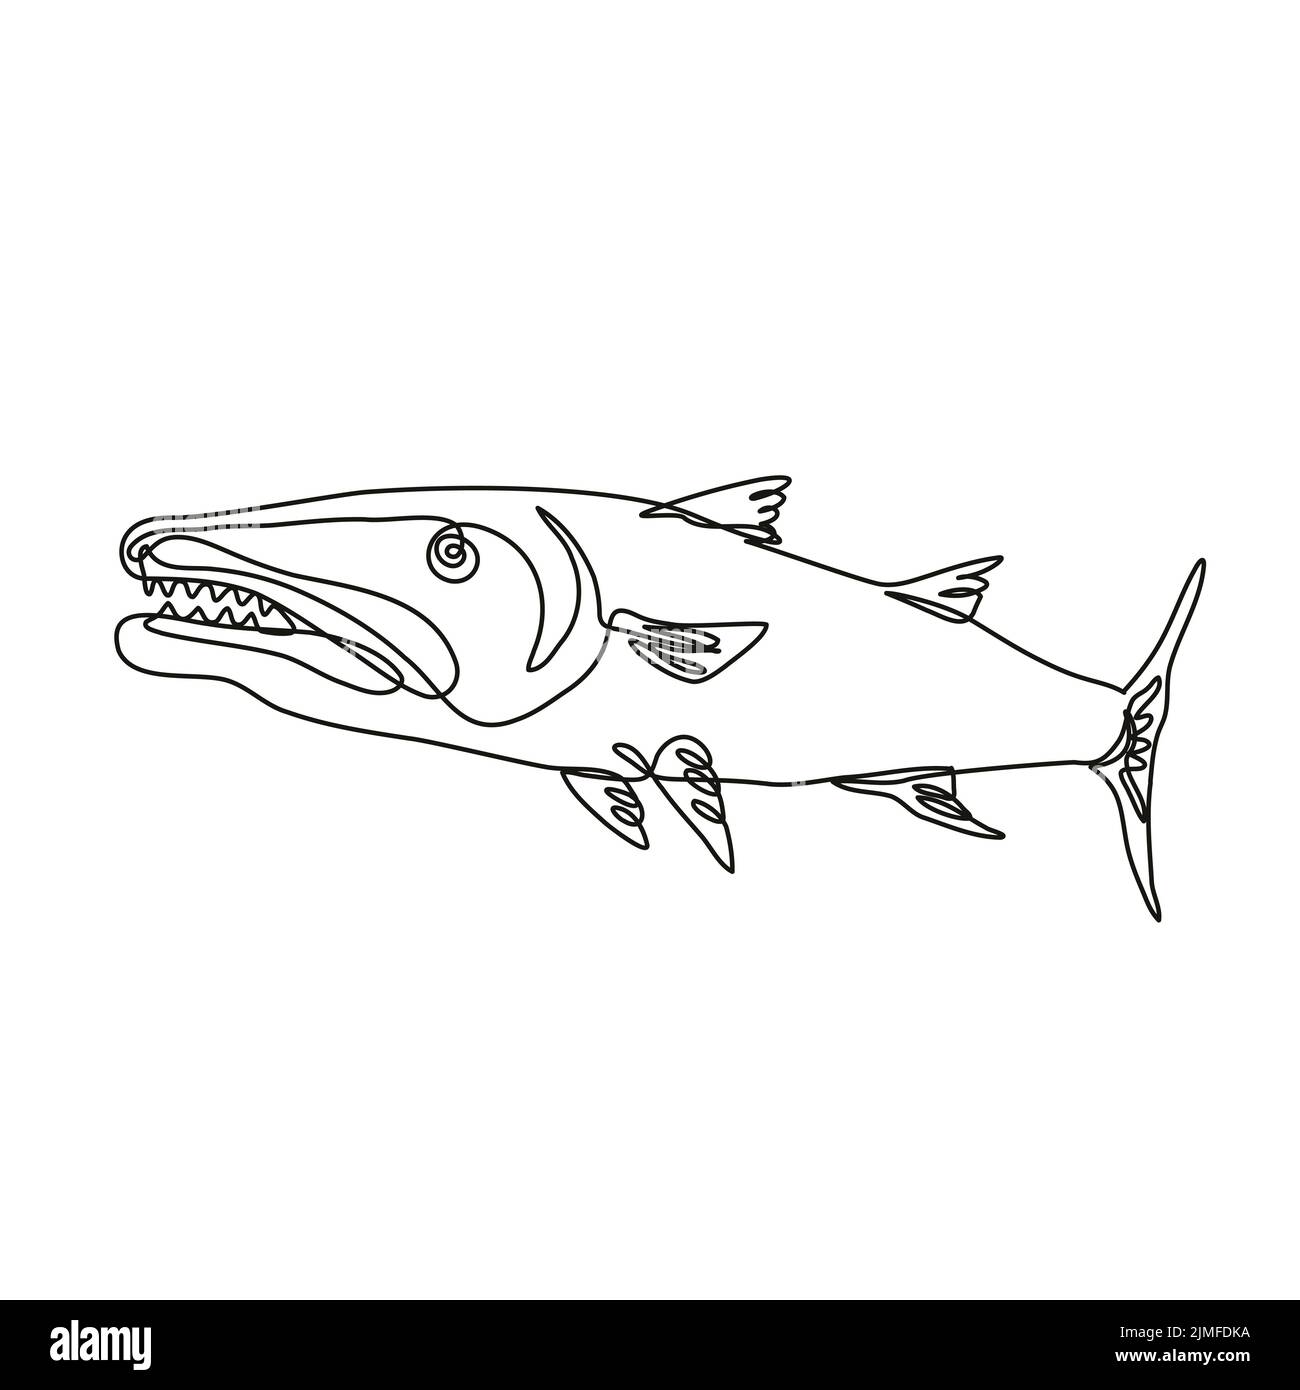 Continuous line drawing illustration of a barracuda or cuda, a large predatory, ray-finned fish viewed from side done in mono line or doodle style in Stock Photo